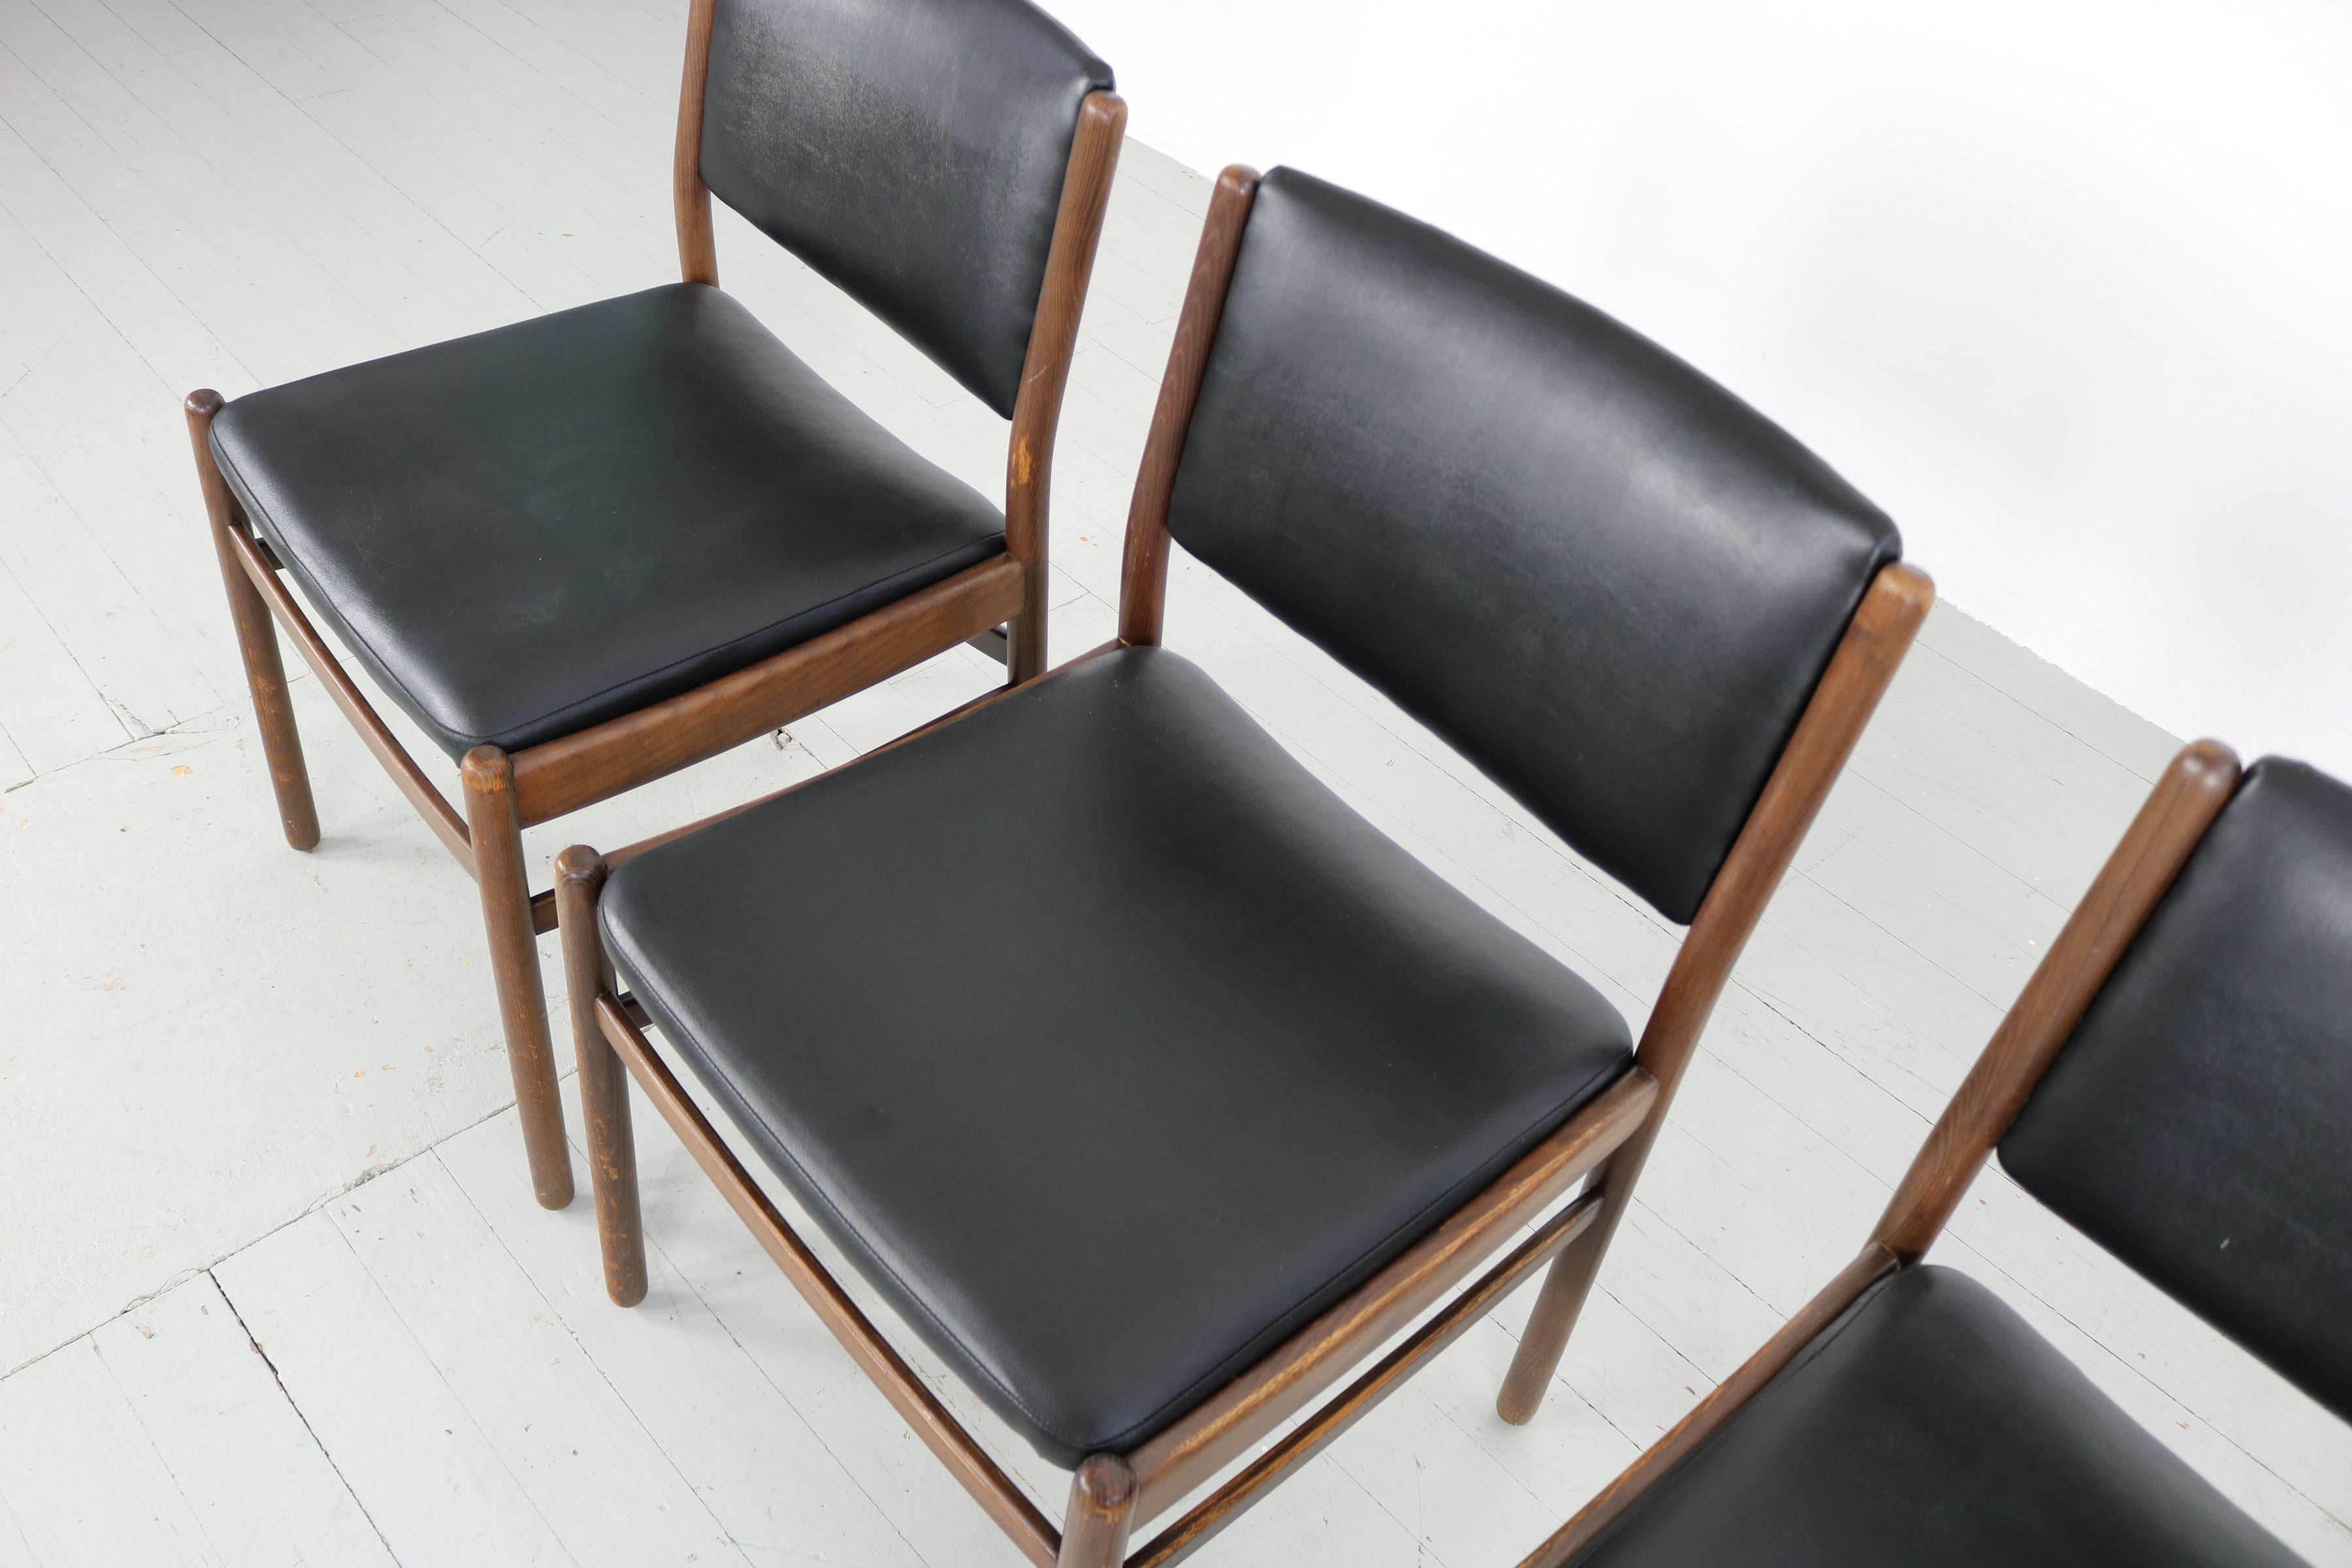 Set of Three Wooden Chairs with Black Leatherette Upholstery, Italy 60s For Sale 6